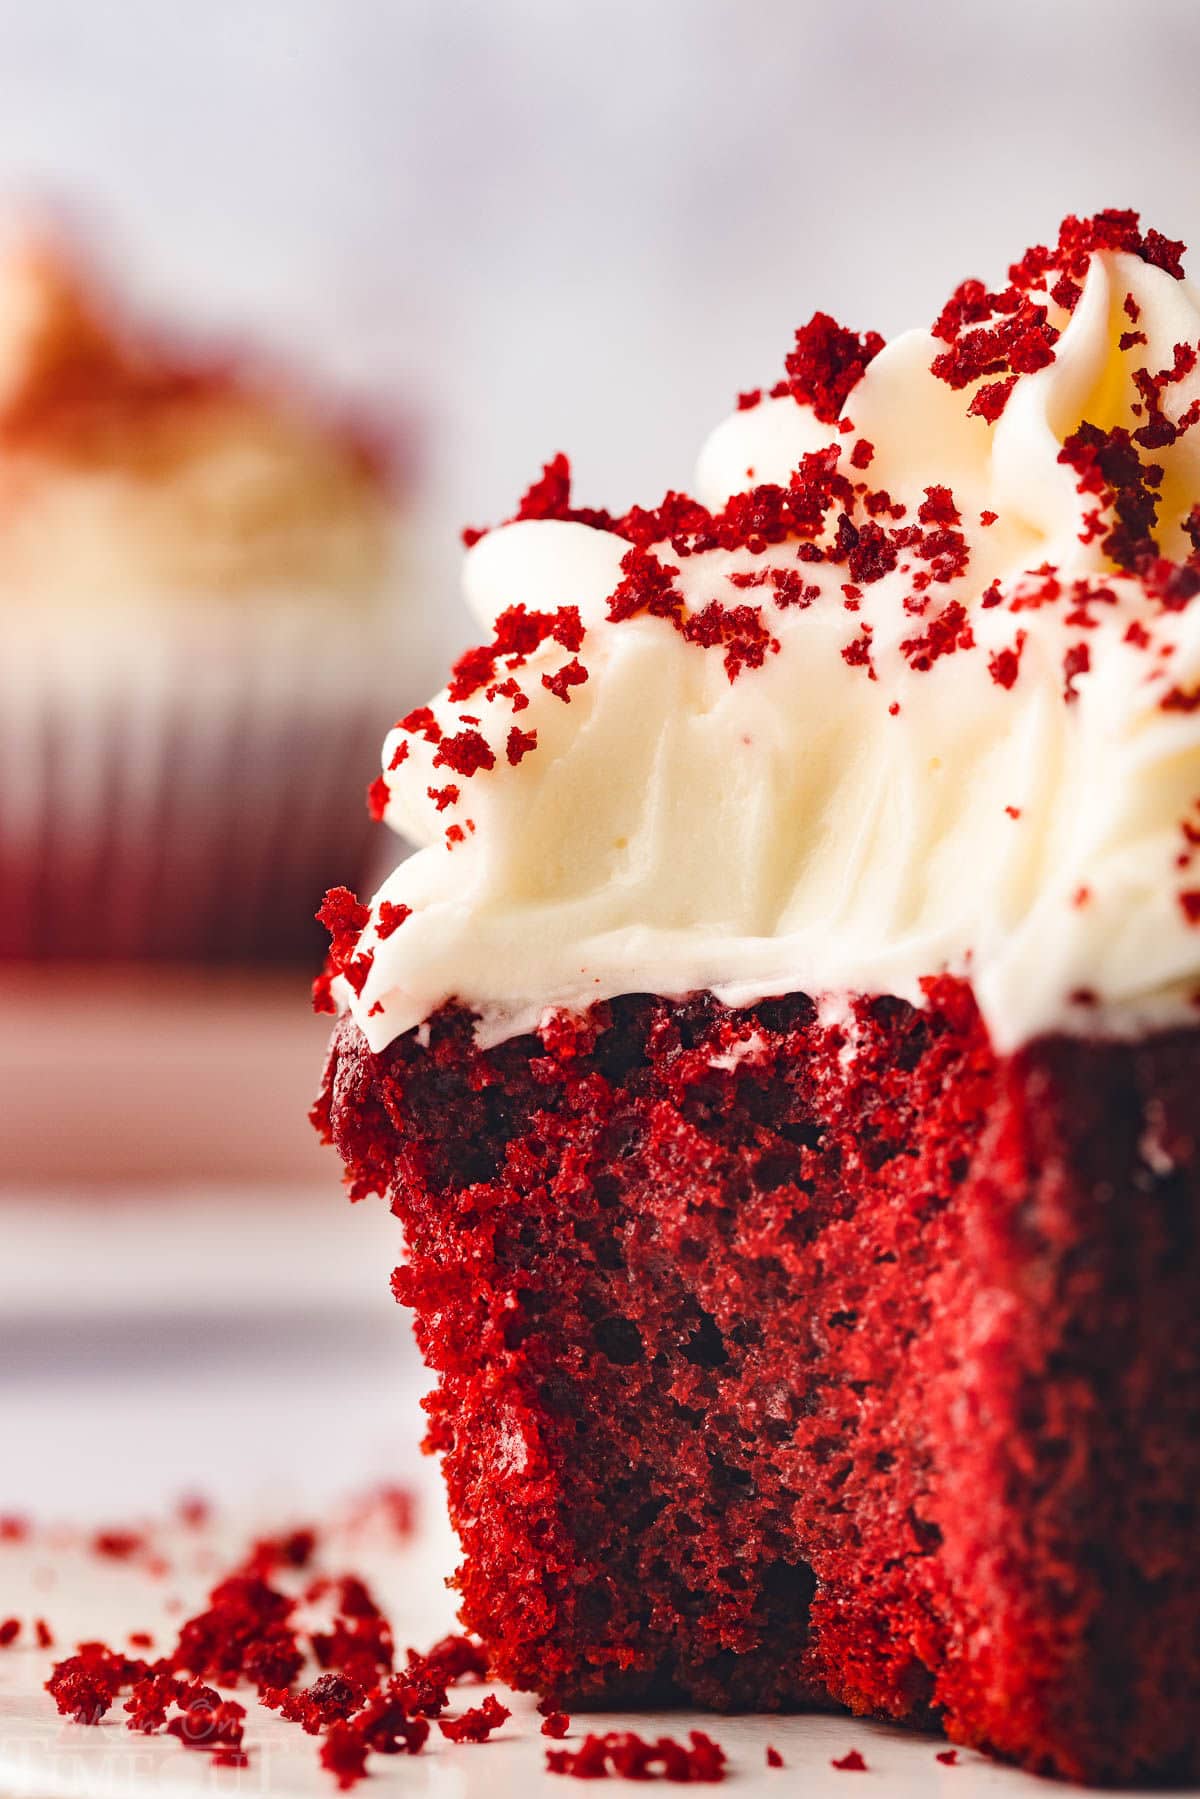 single red velvet cupcake frosted with cream cheese frosting. a bite has been taken from the cupcake which is wonderfully vibrant red.